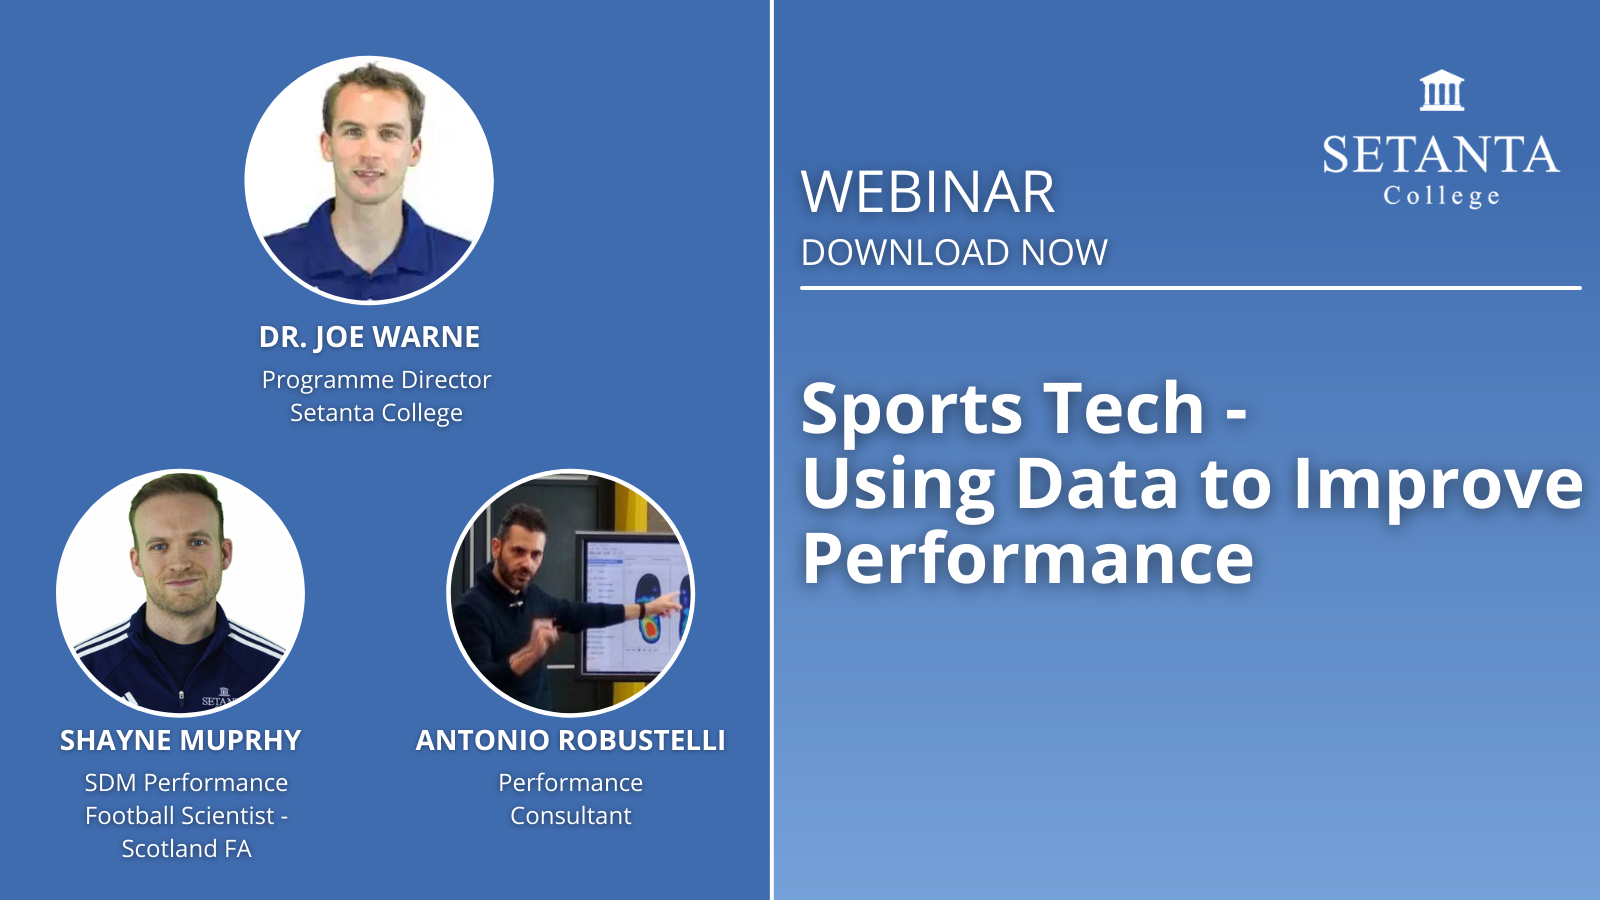 Sports Tech - Using Data to Improve Performance